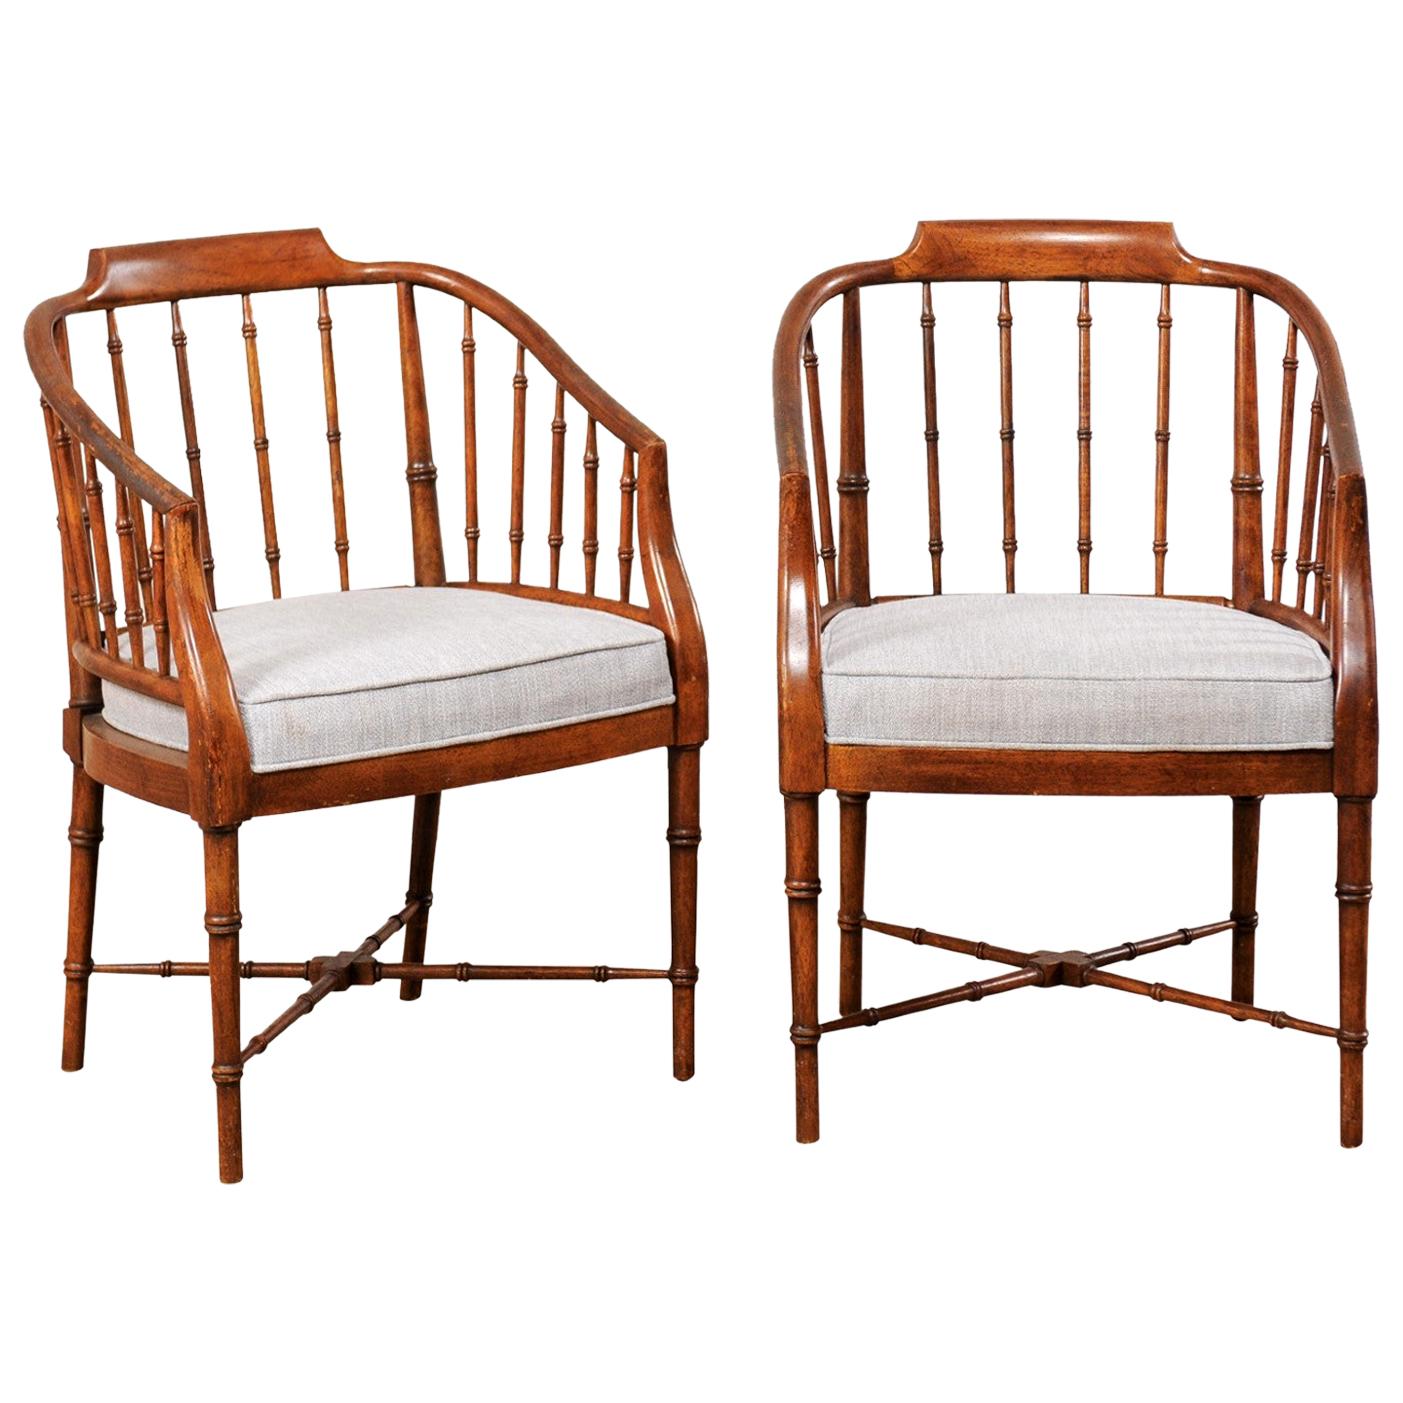 Pair of Midcentury American Faux-Bamboo Chairs